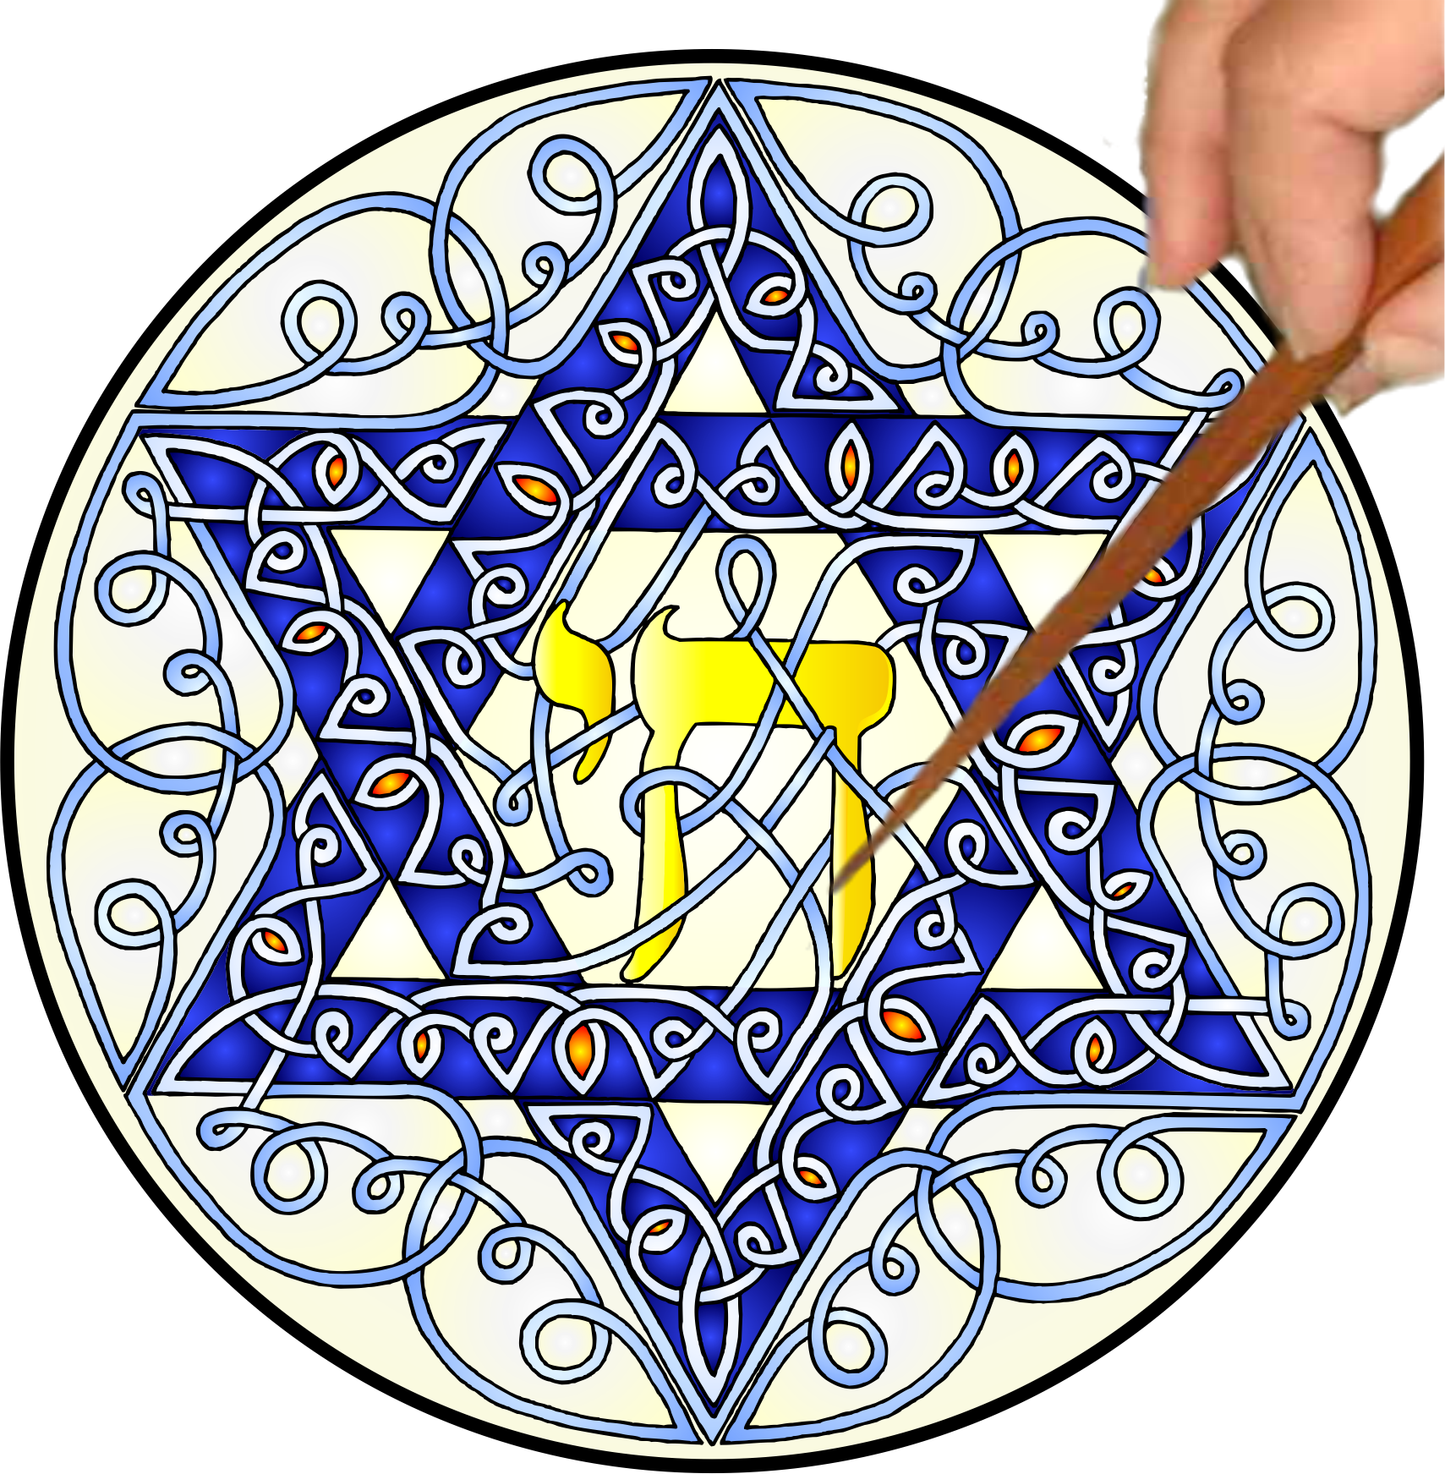 Celtic Star of David Mandalynth - Mindful Tracing Art for Stress, Anxiety and Attention Management